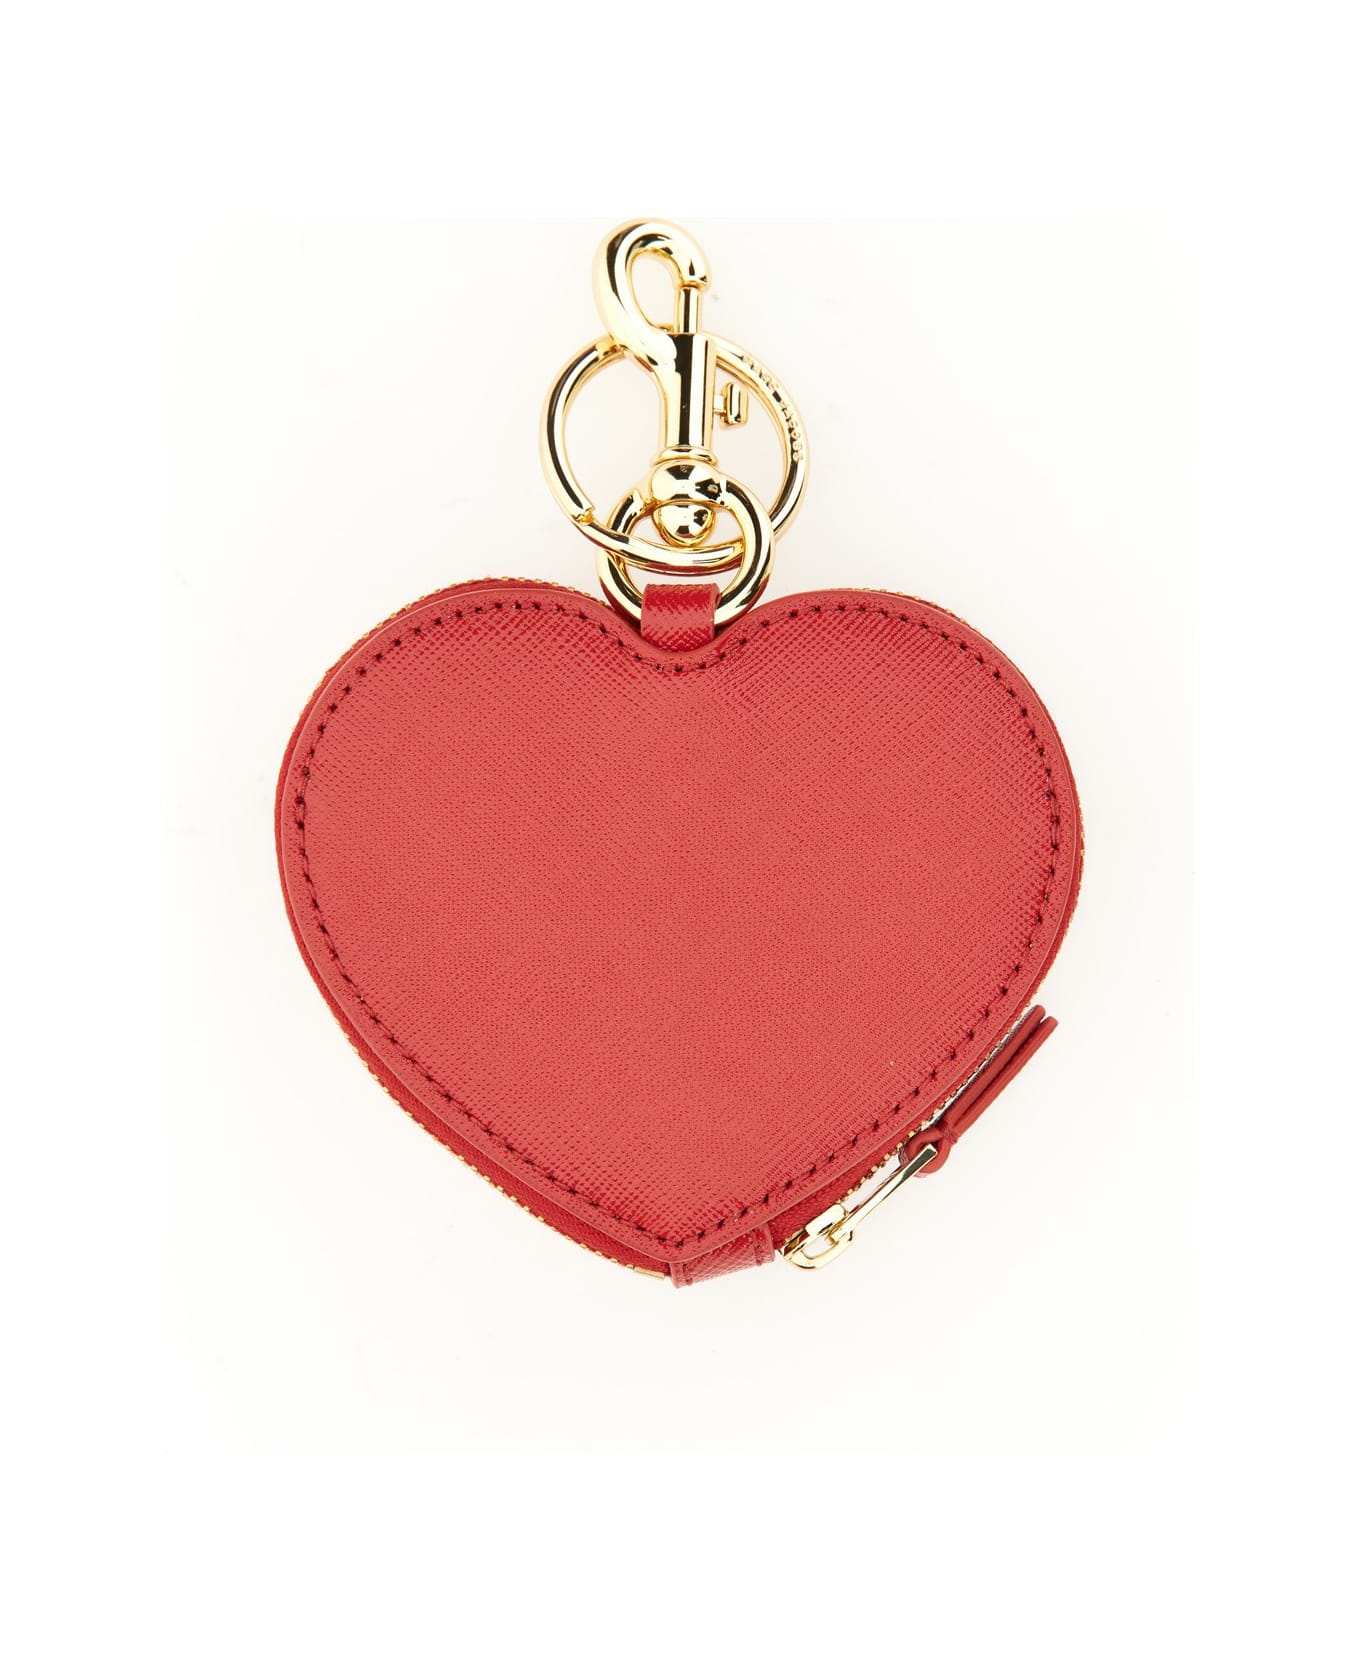 Marc Jacobs Pouch The Heart - True Red